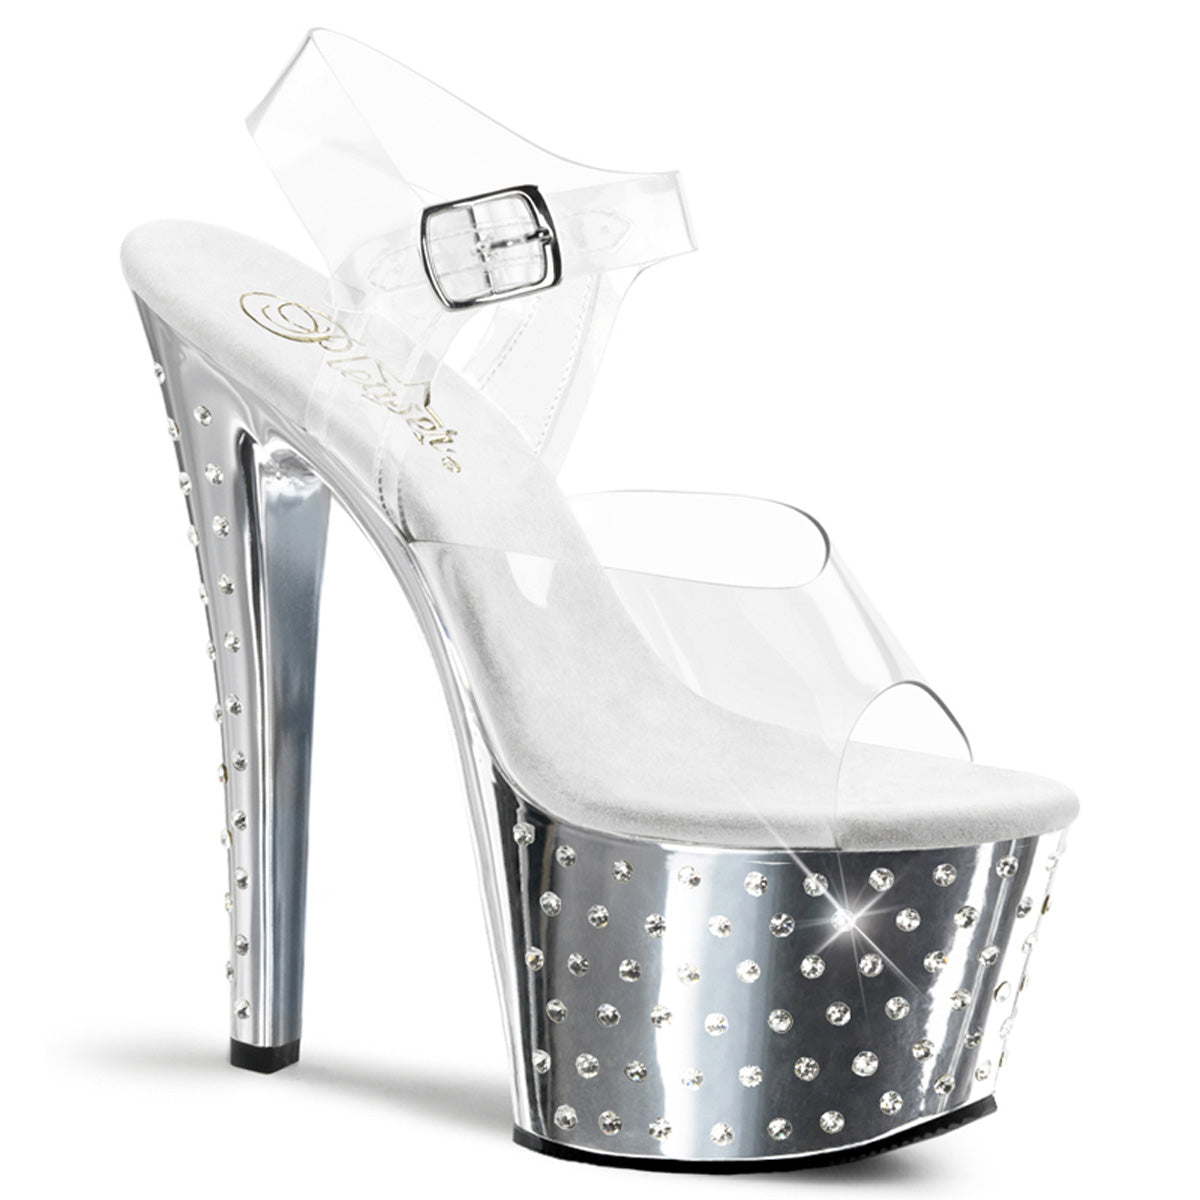 STARDUST-708 7 Inch Heel ClearSilver Chrome Strippers Shoes-Pleaser- Sexy Shoes